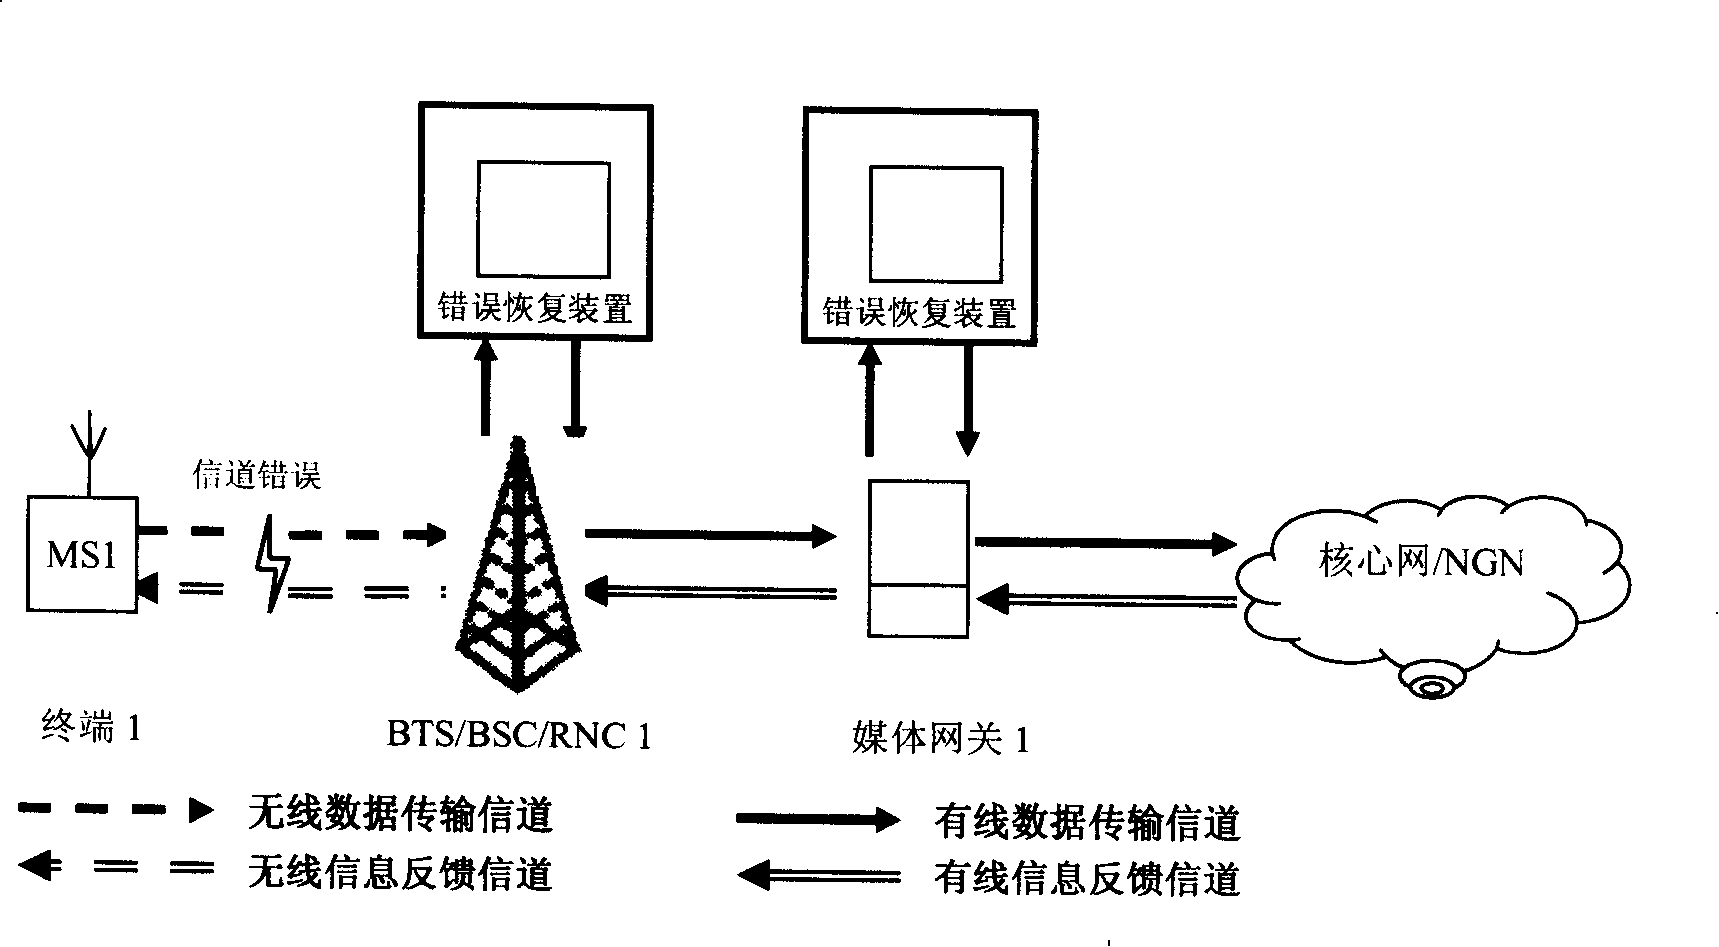 Self-adapted error recovery device, video communication system and method based on feedback